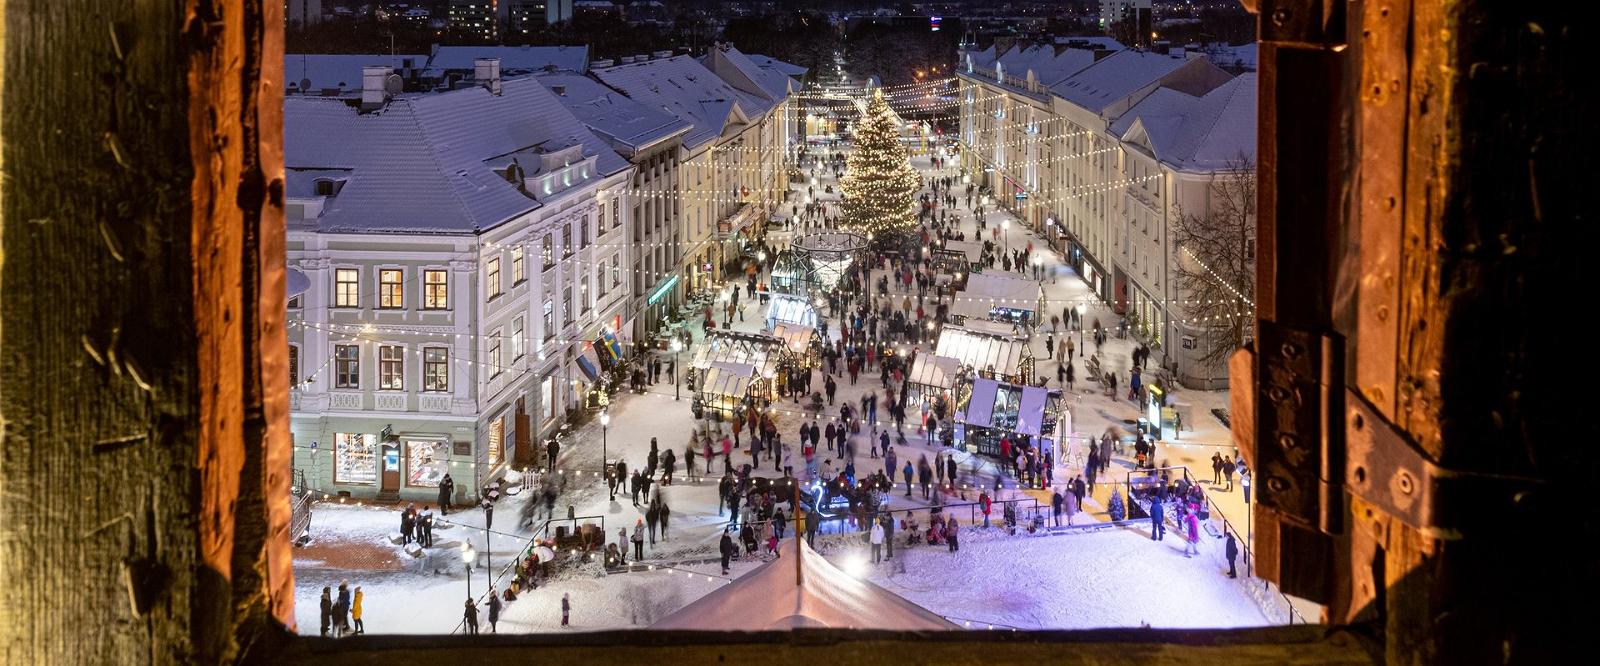 Virtual tour of the city of Tartu: View from the Town Hall bell tower to the snowy Christmas town of Tartu